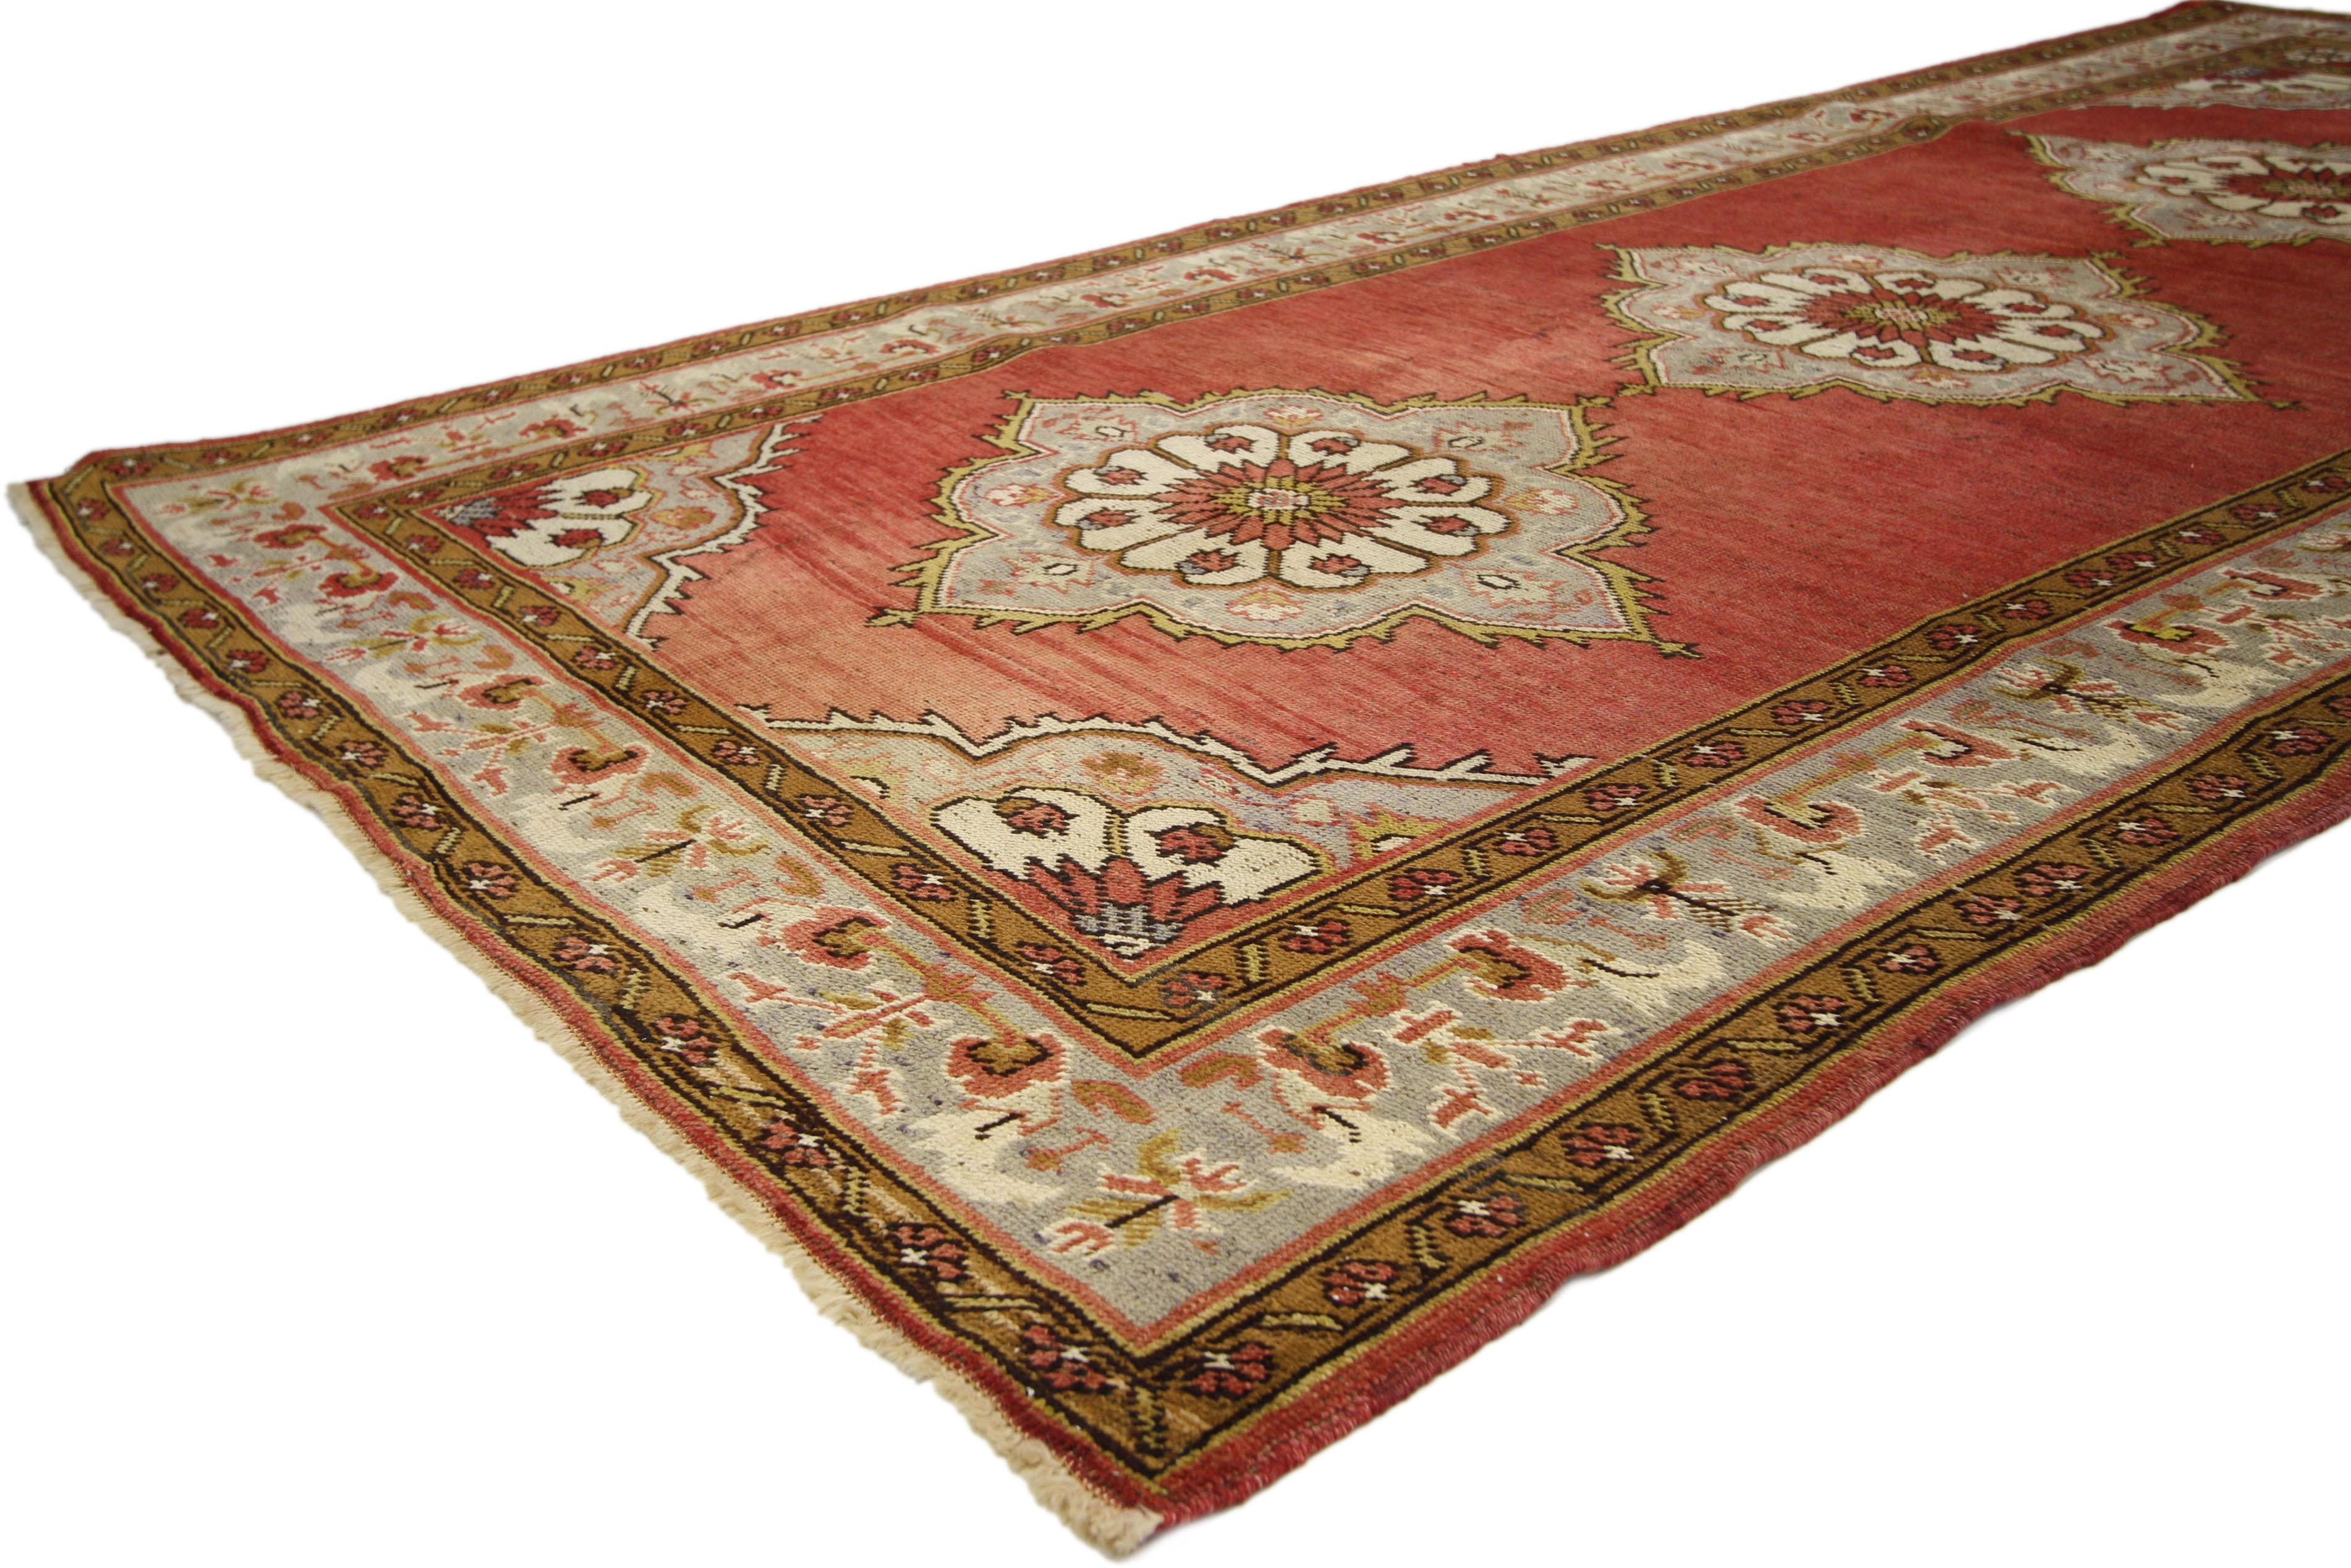 73753, vintage Turkish Oushak Gallery rug, Wide Hallway Runner with Jacobean Tudor style. Impressive in style and impeccably woven, this vintage Turkish Oushak rug with modern elegance features three ornate medallions in an open Abrash red field